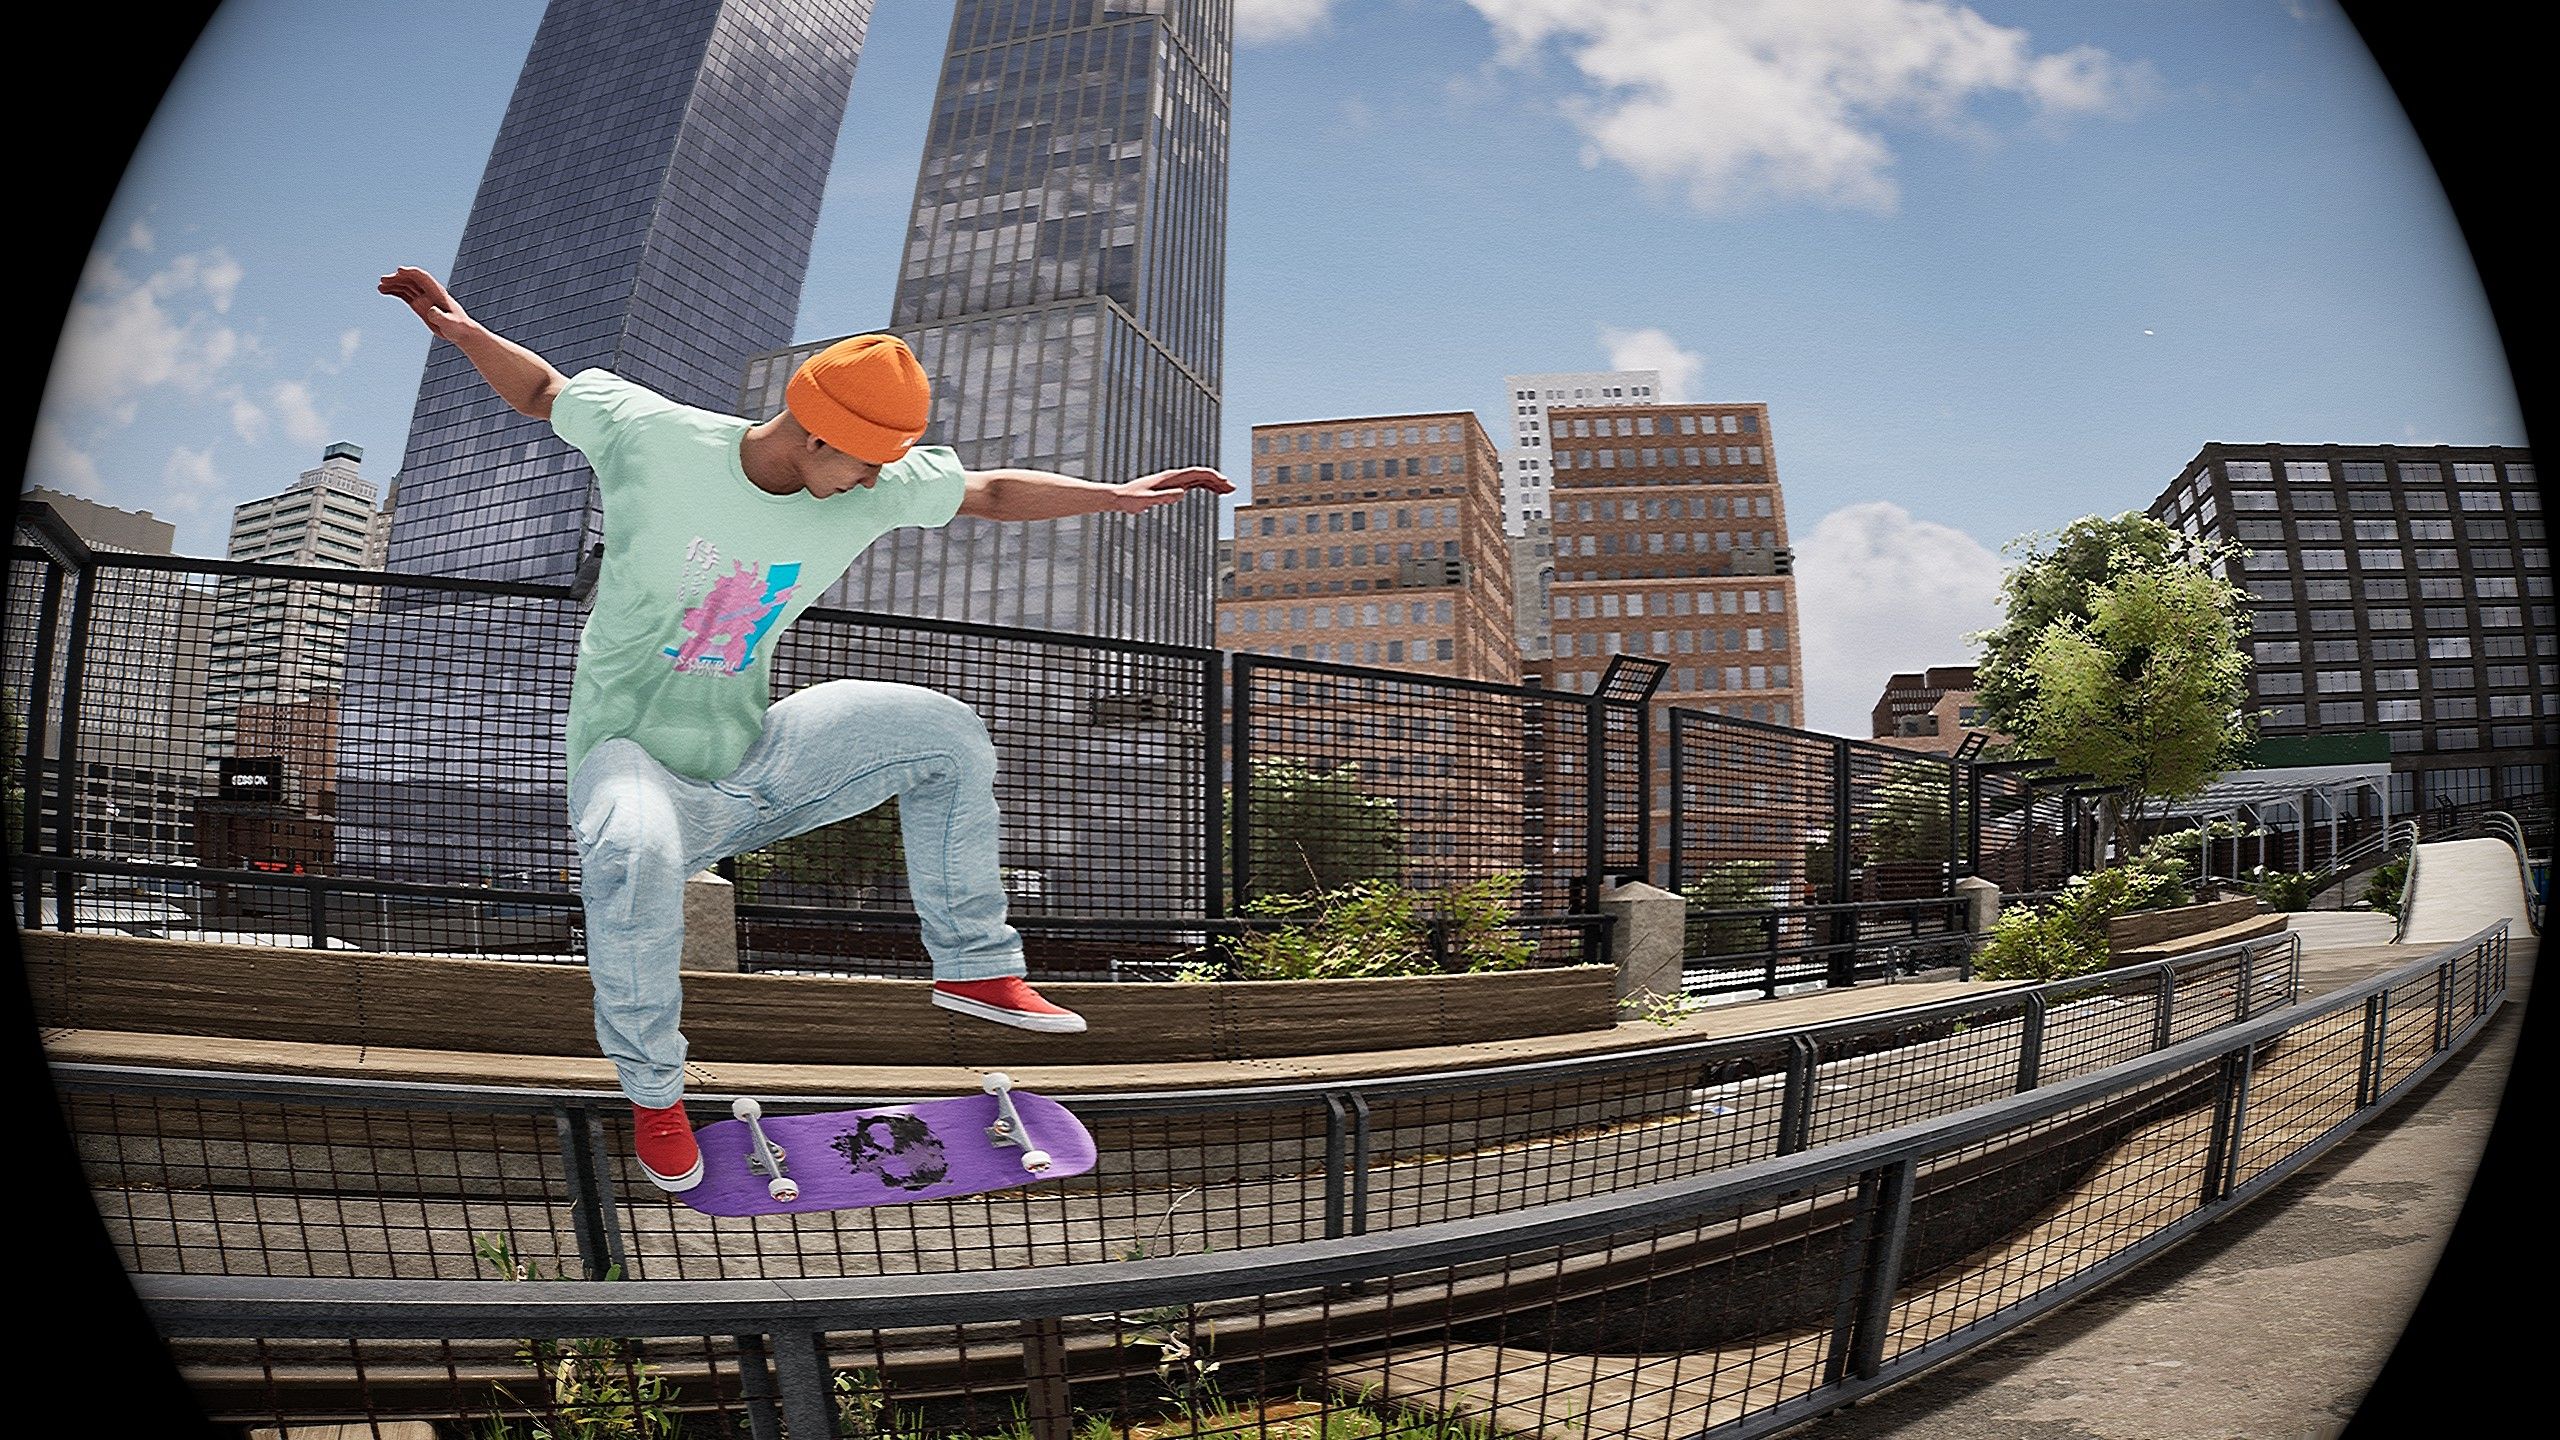 A skater jumps off his board in a rail in an urban environment in Session